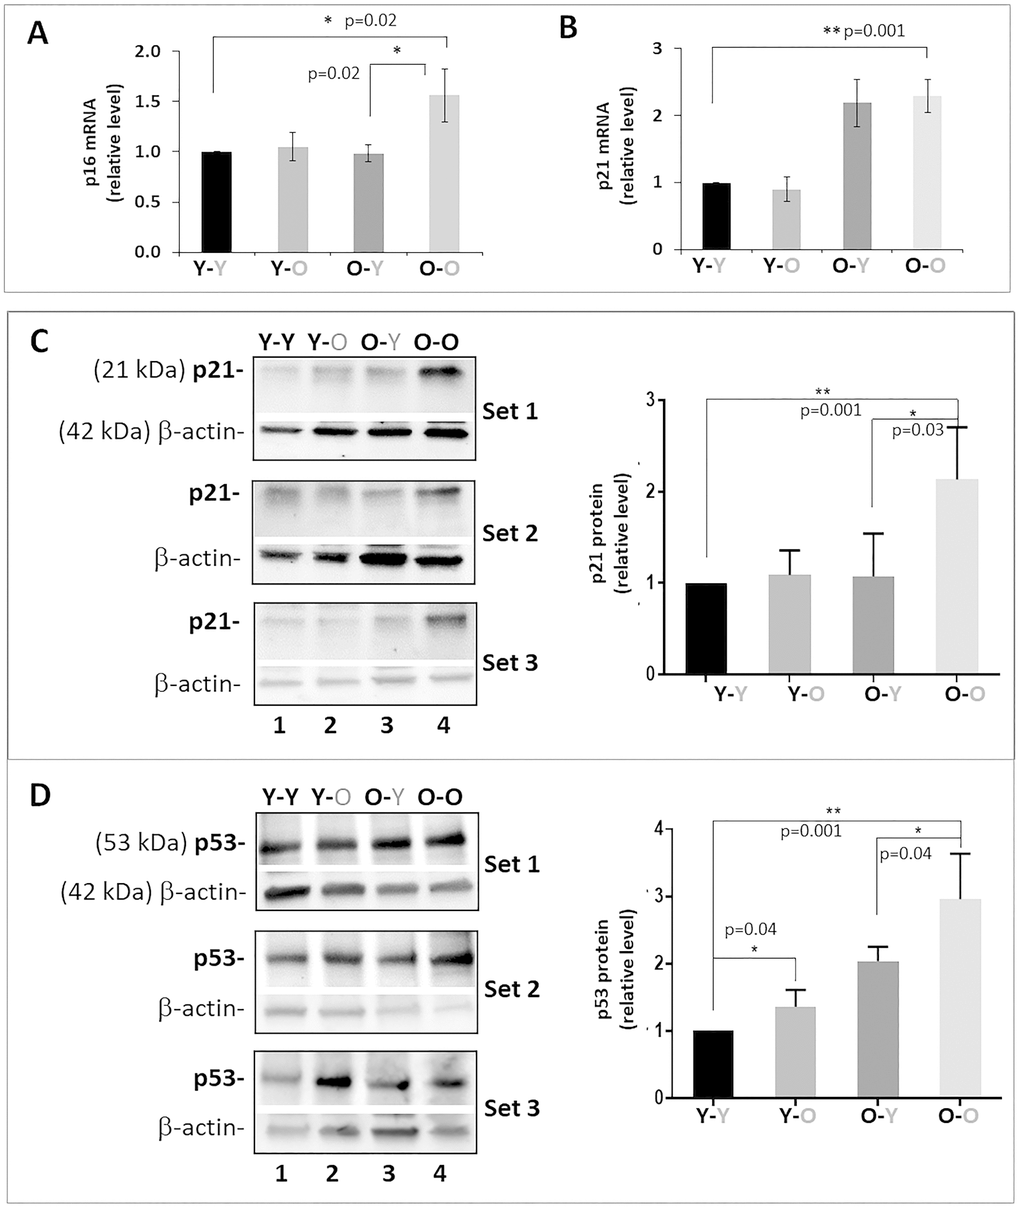 Effects of circulatory factors on expression of cellular senescence markers in IVDs in mouse heterochronic parabiotants. qRT-PCR quantitation of disc p16INK4a (A) and p21Cip1 (B) mRNAs. Western blot of p21Cip1 (C) and p53 (D) protein. Graphs on the right of the Western blot showed quantitation of these proteins normalized to actin. Data shown are mean ± SD of 5 independent experiments for RT-PCR and 4 experiments for Western blot, *p p 